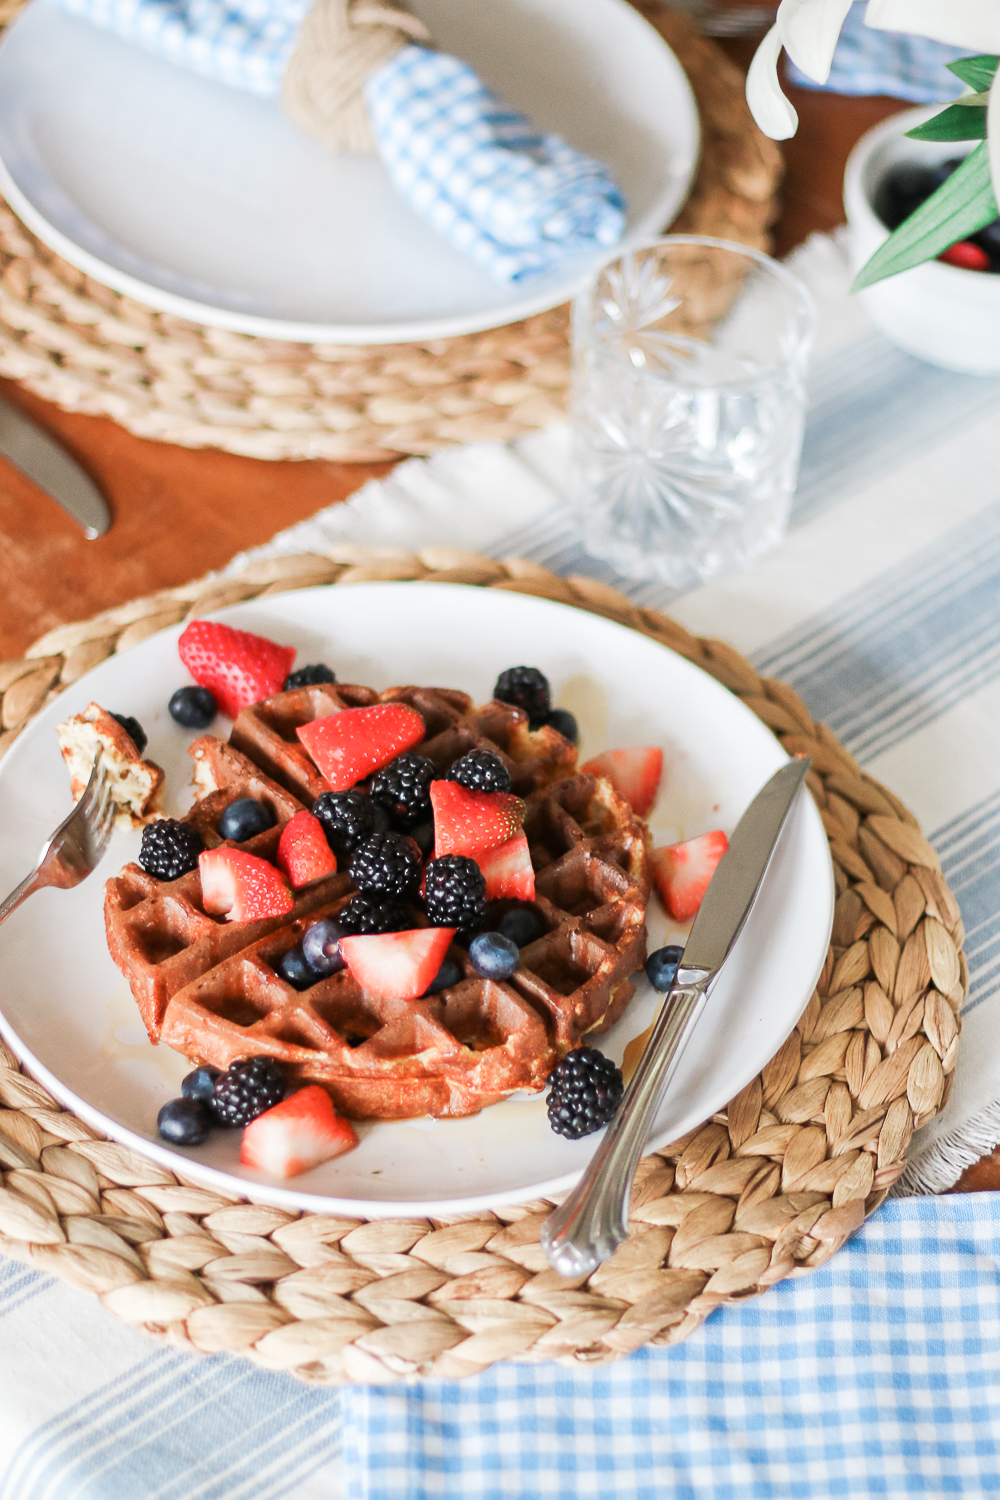 Oatmeal Protein Waffles Recipe, Easy Protein Waffles Recipe for Meal Prepping by Stephanie Ziajka from the healthy southern lifestyle blog Diary of a Debutante, protein waffles recipe easy, protein waffles low carb, protein waffles with oatmeal, cottage cheese, eggs, and egg whites